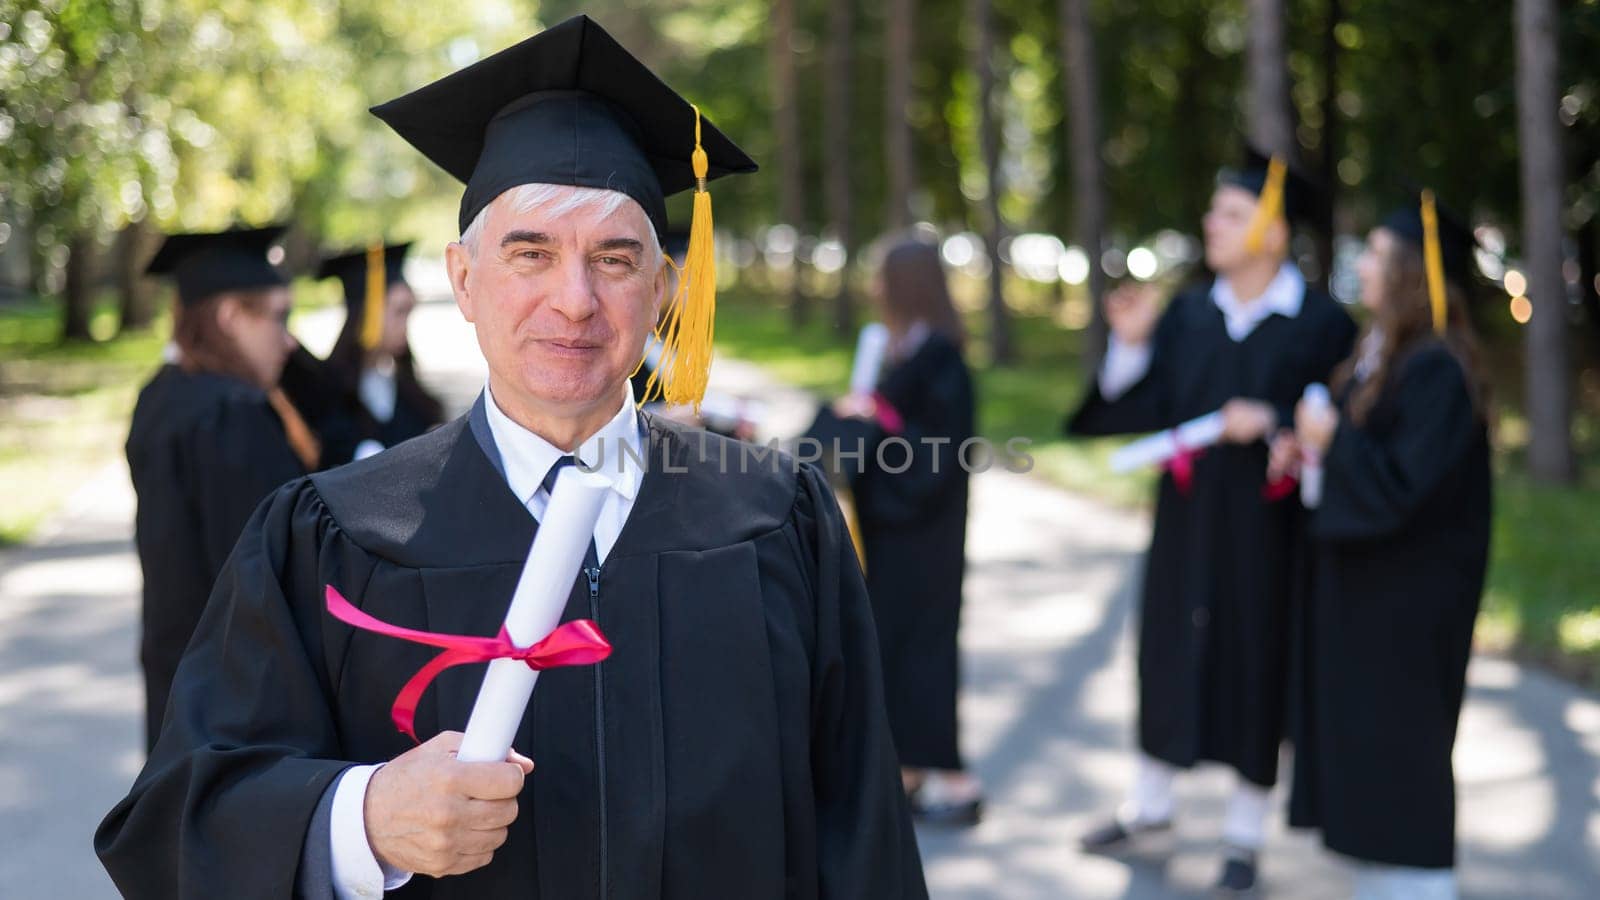 A group of graduates in robes outdoors. An elderly student rejoices at receiving a diploma